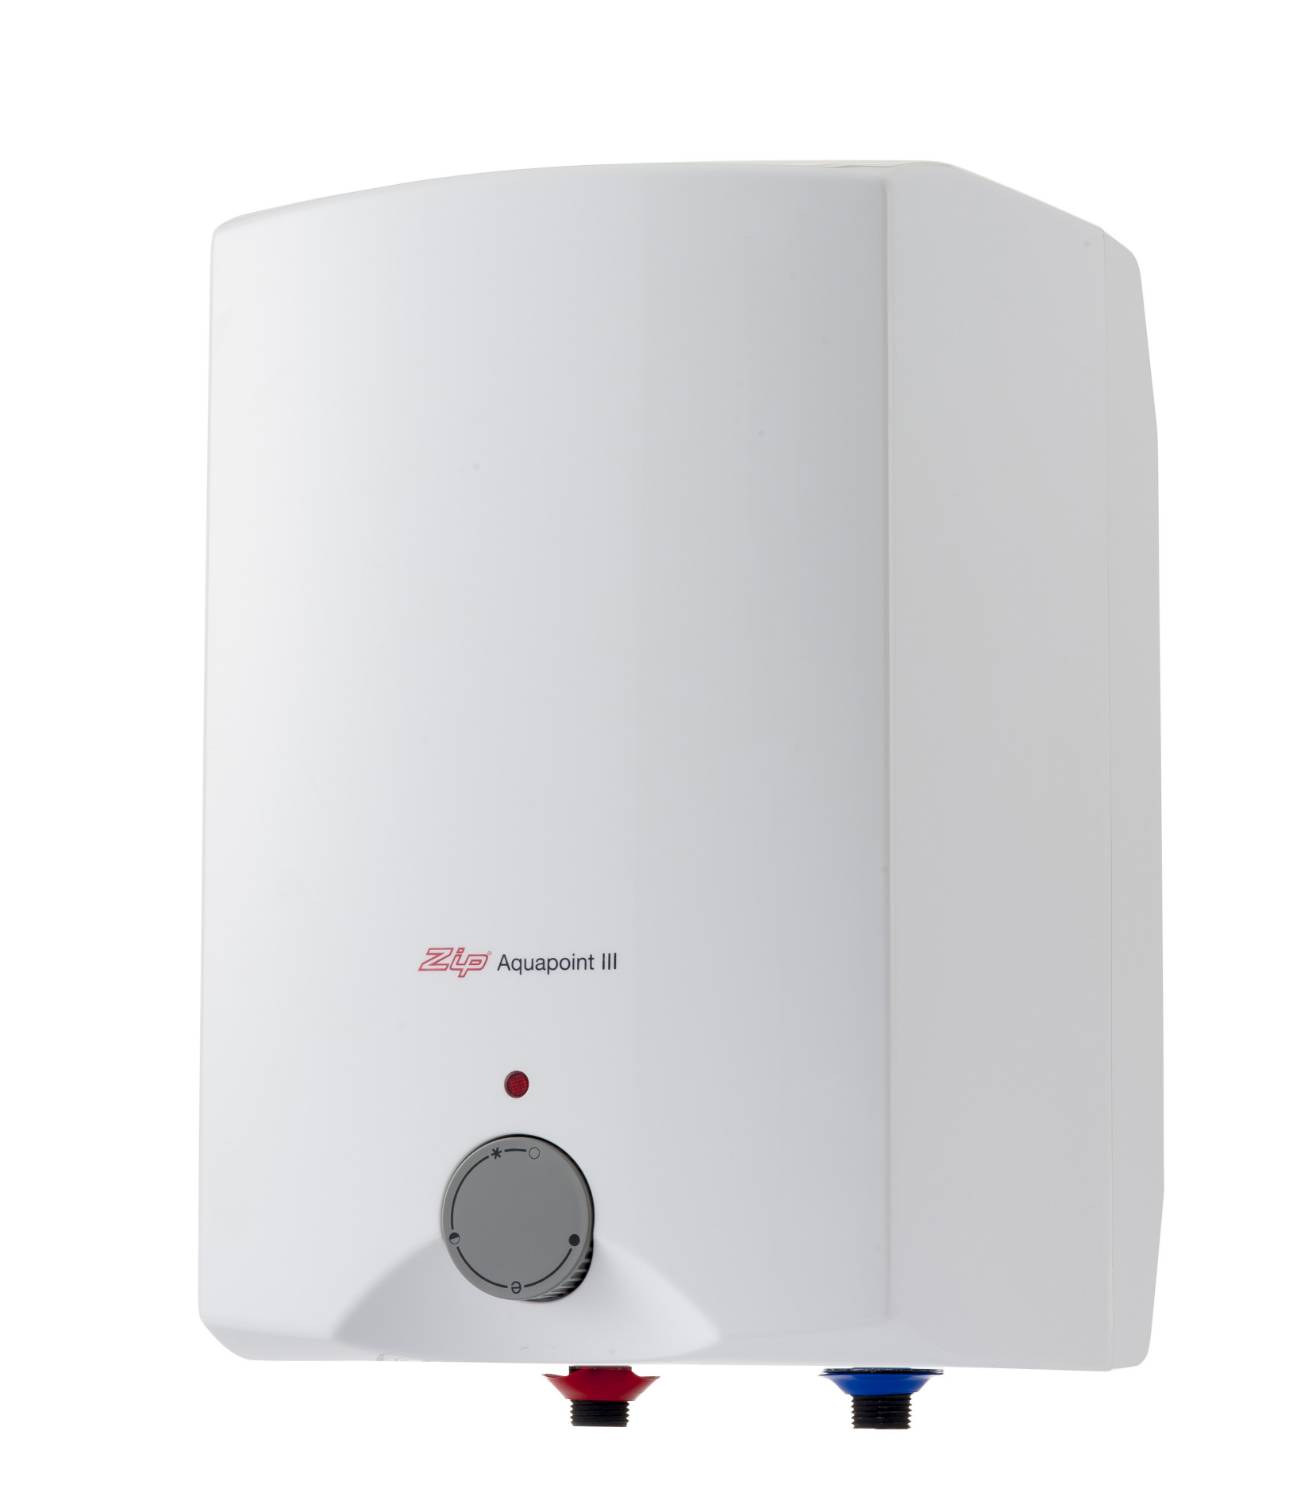 Unvented Water Heaters  - Water Dispenser